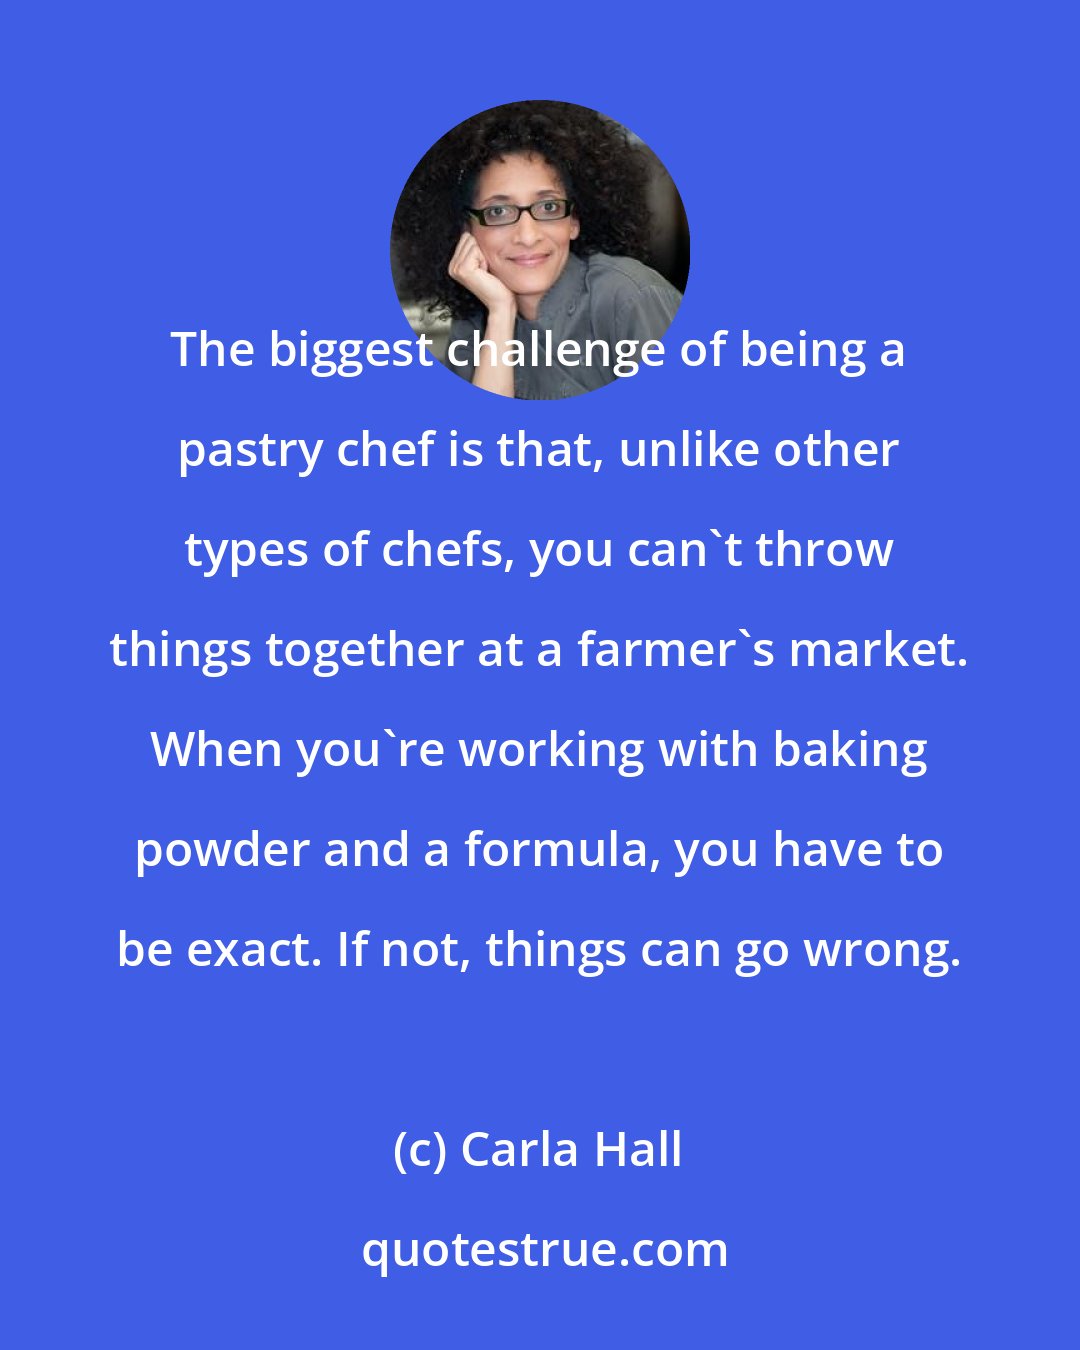 Carla Hall: The biggest challenge of being a pastry chef is that, unlike other types of chefs, you can't throw things together at a farmer's market. When you're working with baking powder and a formula, you have to be exact. If not, things can go wrong.